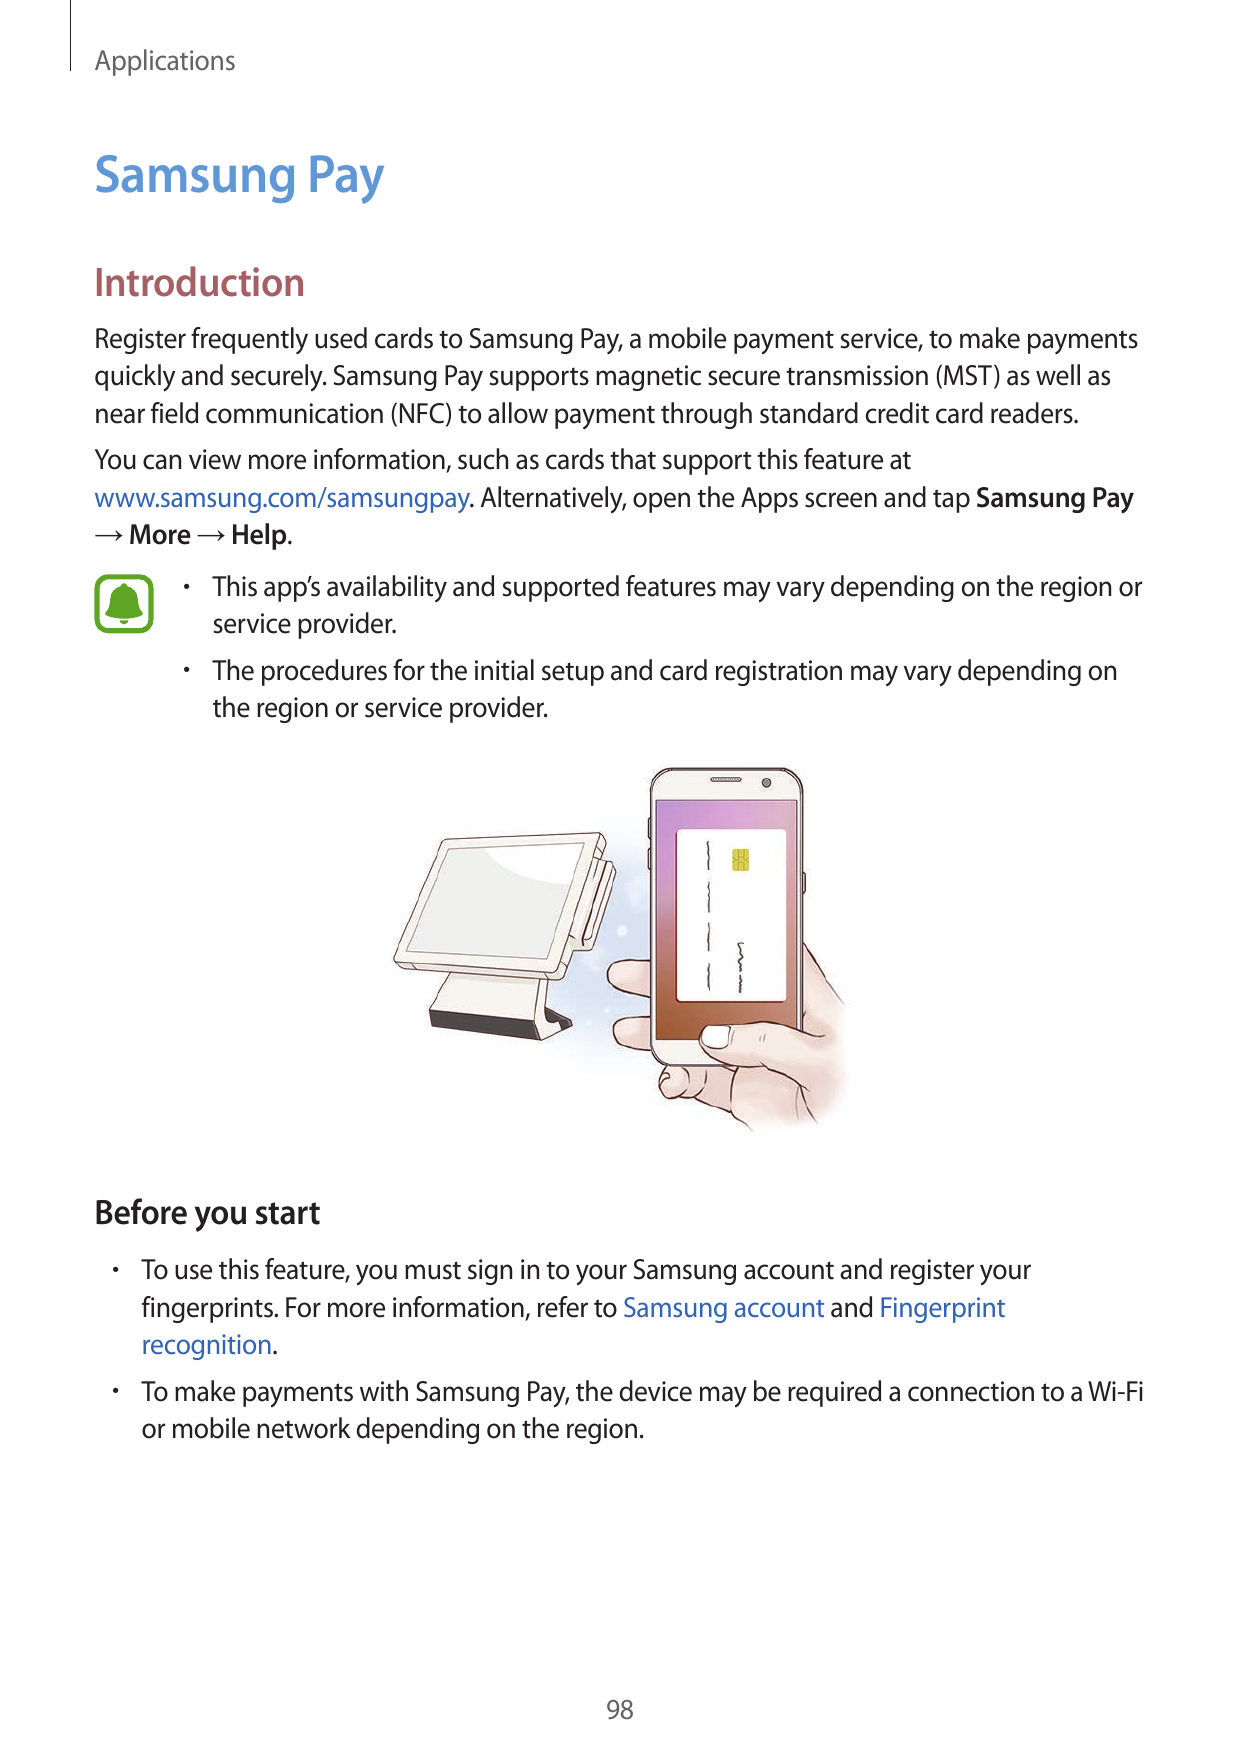 ApplicationsSamsung PayIntroductionRegister frequently used cards to Samsung Pay, a mobile payment service, to make paymentsquic